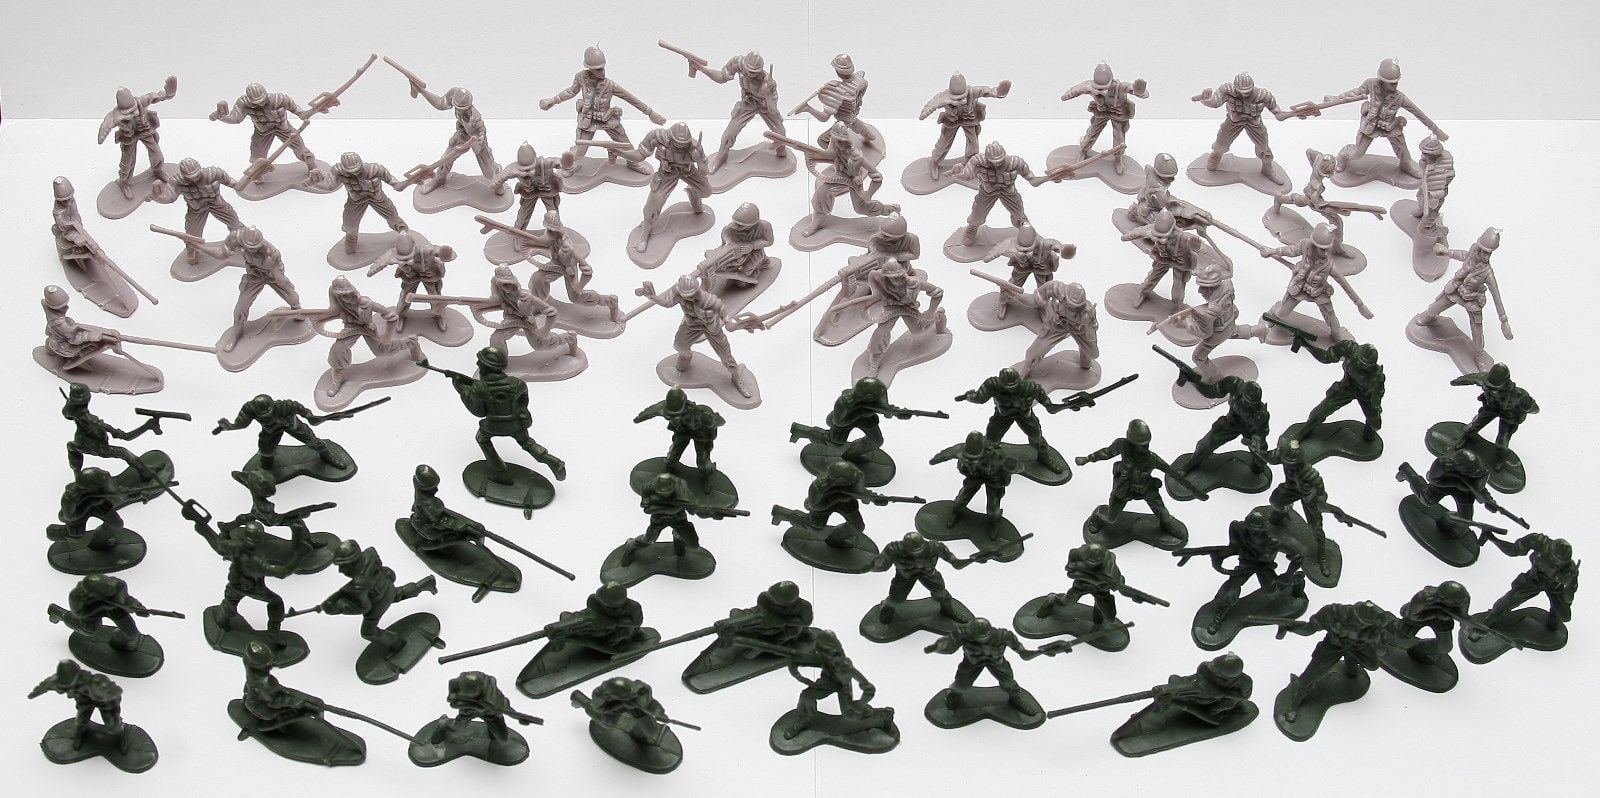 Details about   Toy soldiers Shaolin Warriors  Soft plastic Height 2.56-1.97in.7pcs